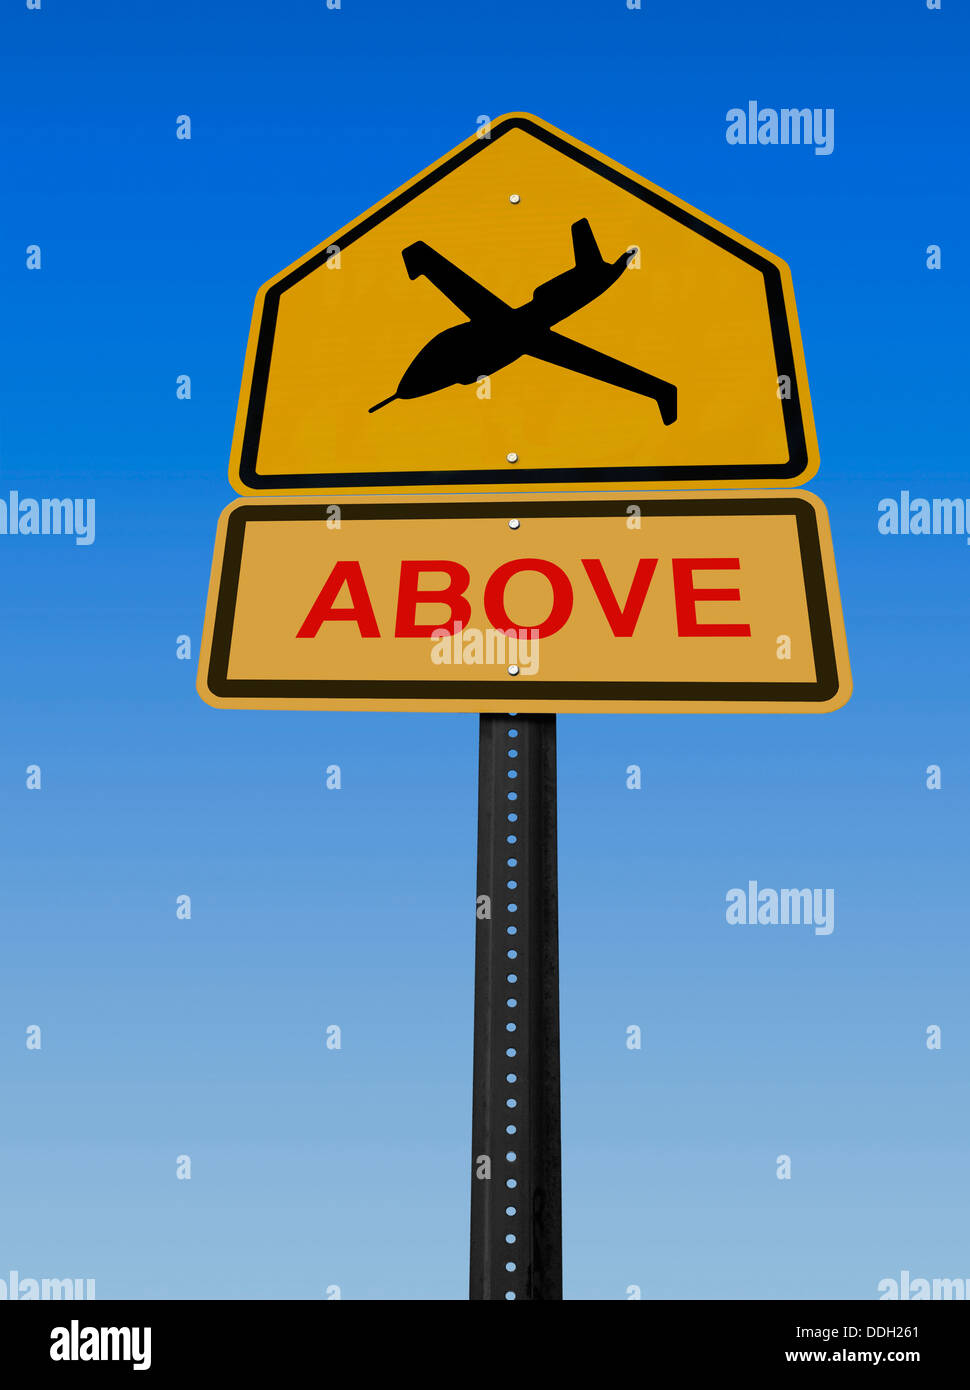 conceptual sign with drone symbol and warning above over blue sky Stock Photo